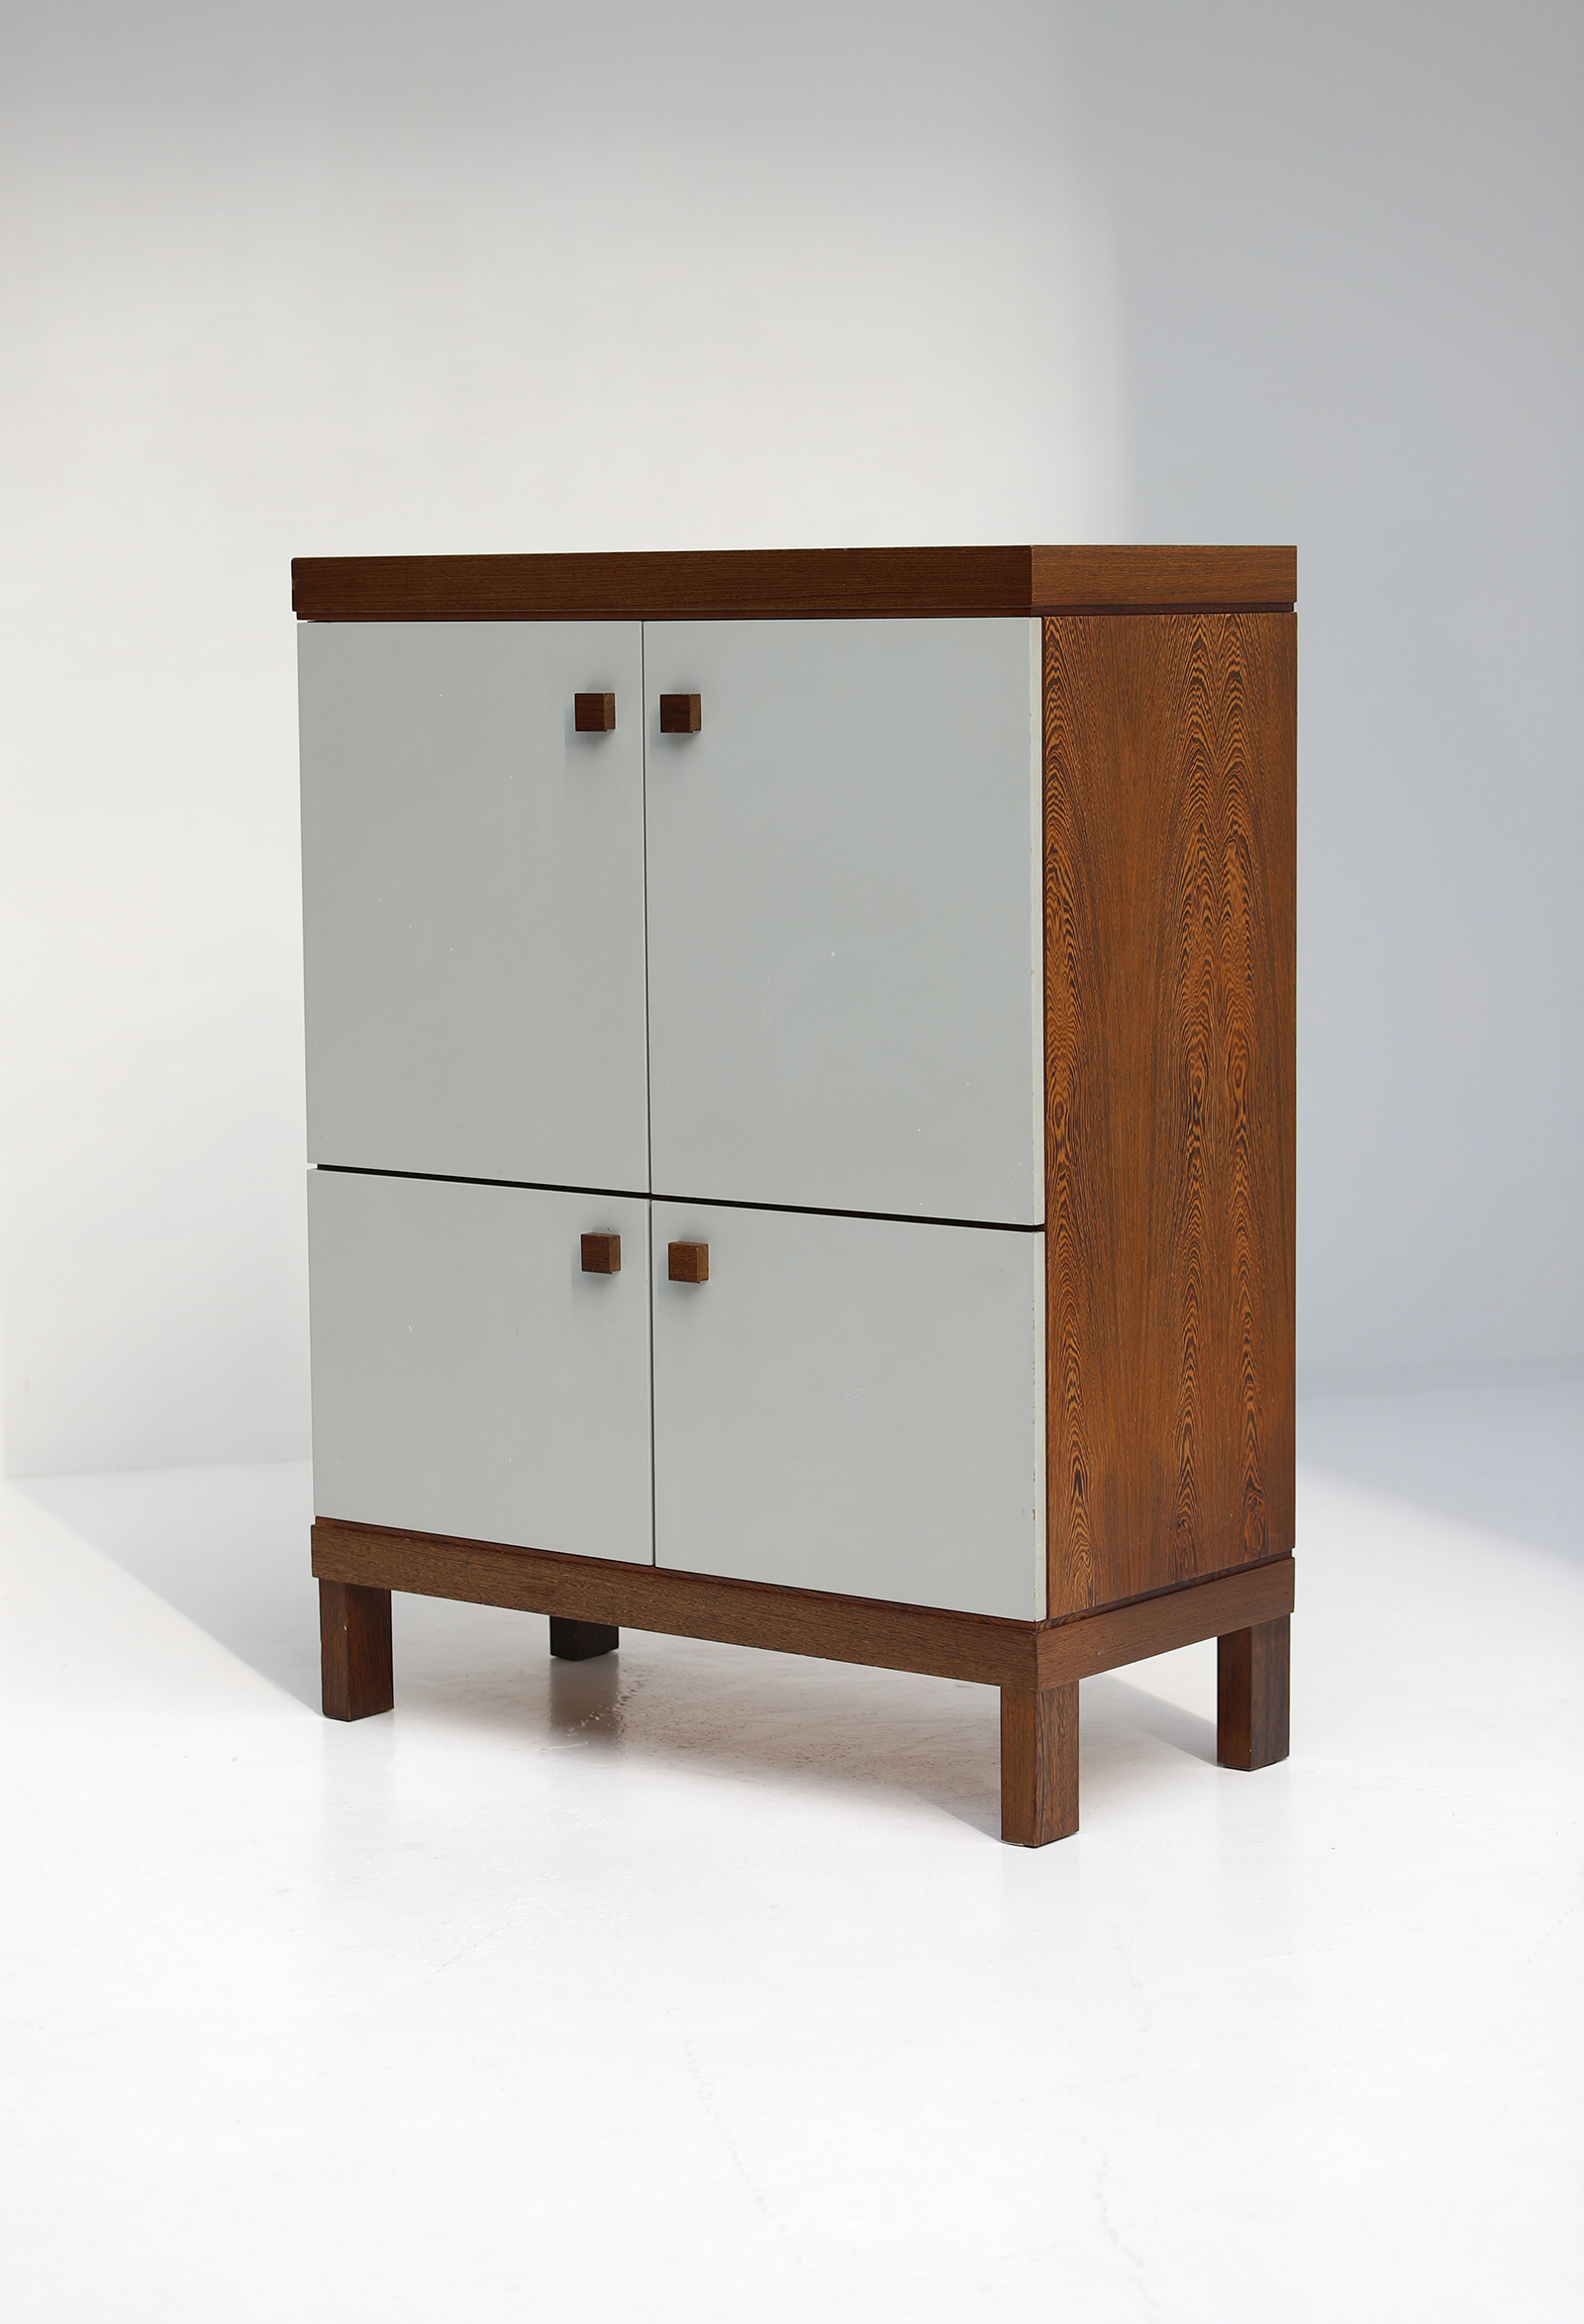 1970s decorative Wenge Cabinet with lacquered doorsimage 7